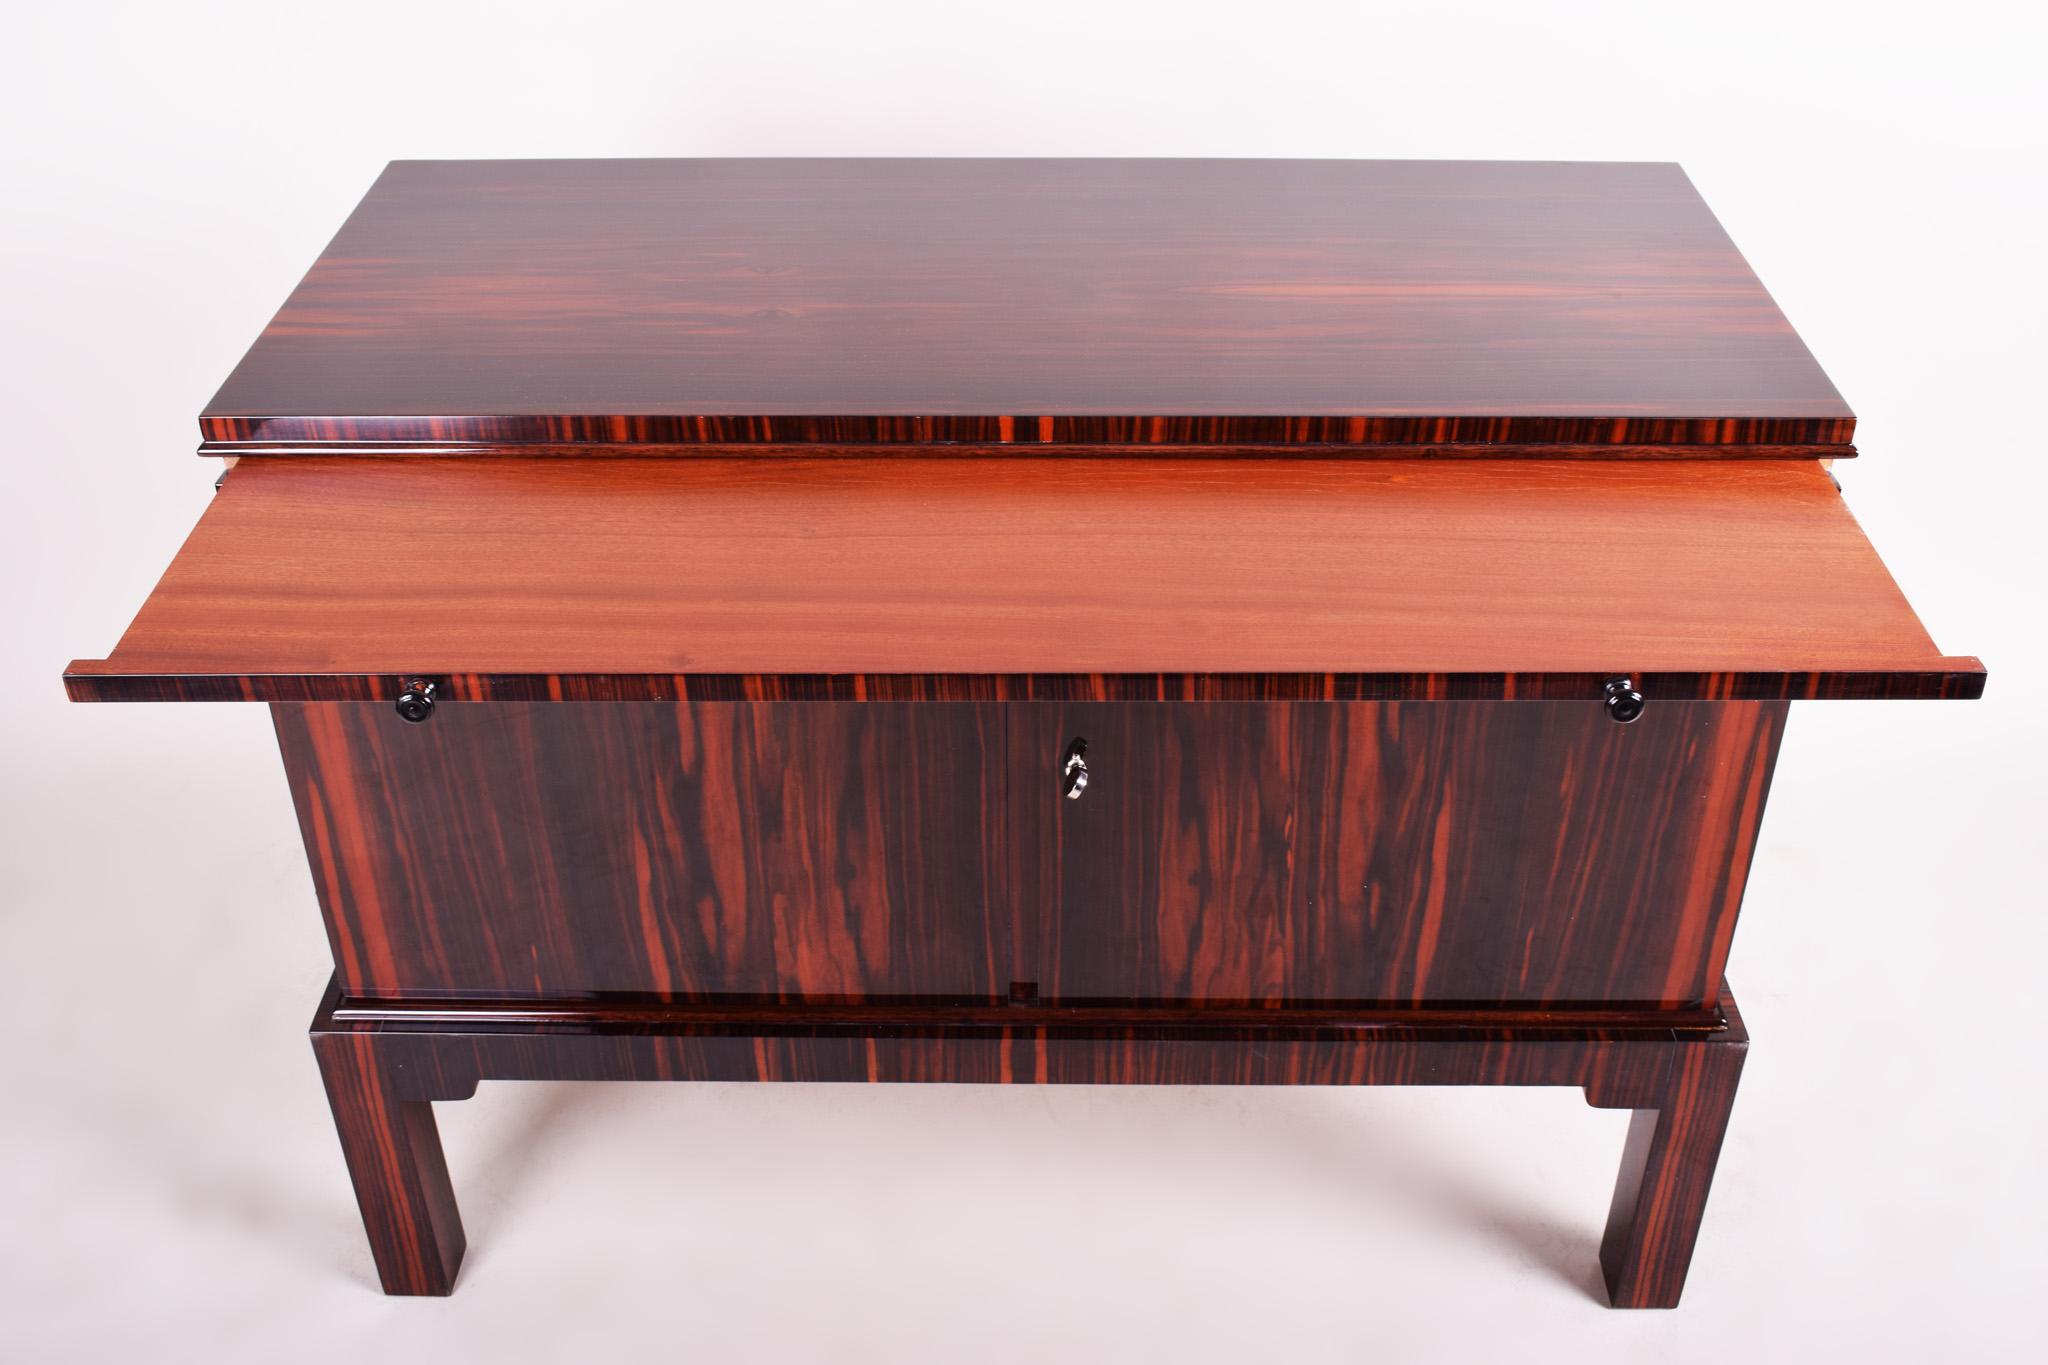 Wood 20th Century French Art Deco Macassar Cabinet/Buffet, High Gloss Lacquer, 1920s For Sale